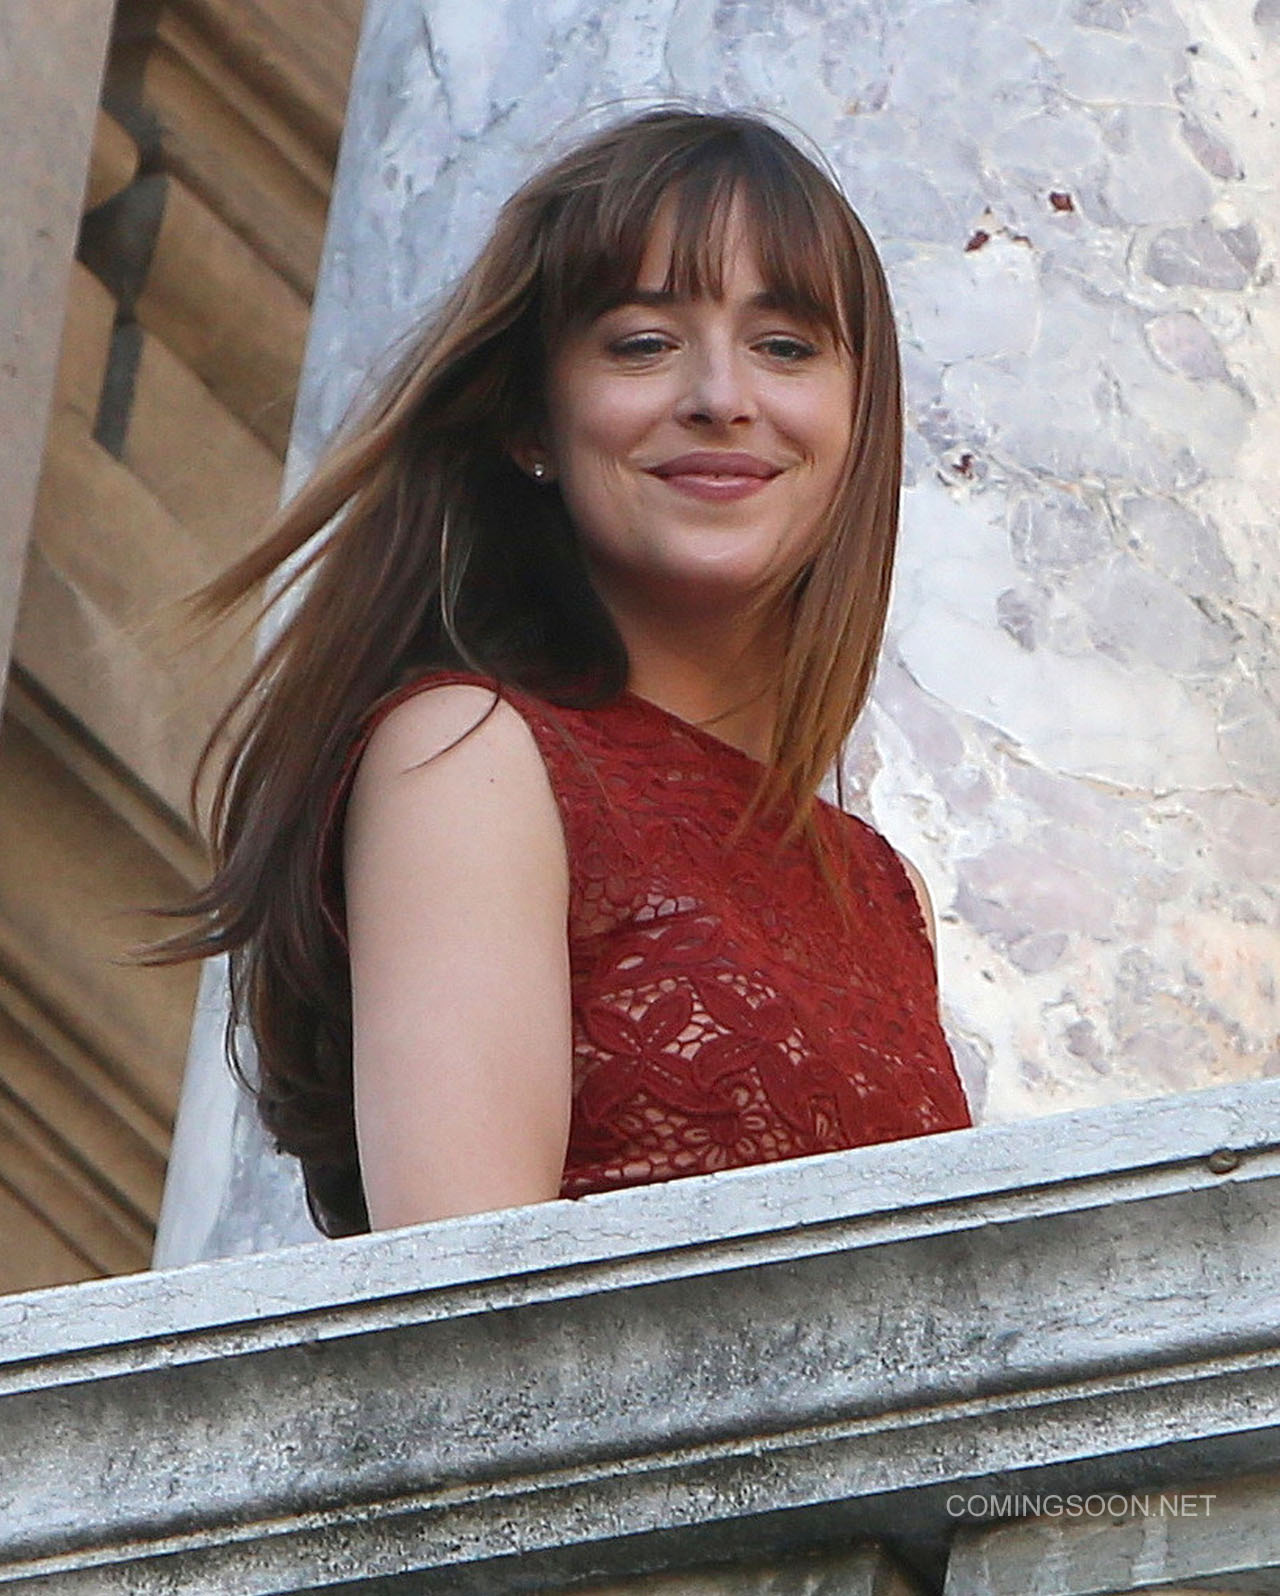 Filming on 'Fifty Shades Darker' takes place at Opera Garnier in Paris Featuring: Dakota Johnson Where: Paris, France When: 18 Jul 2016 Credit: WENN.com **Not available for publication in France, Belgium, Spain, Italy**